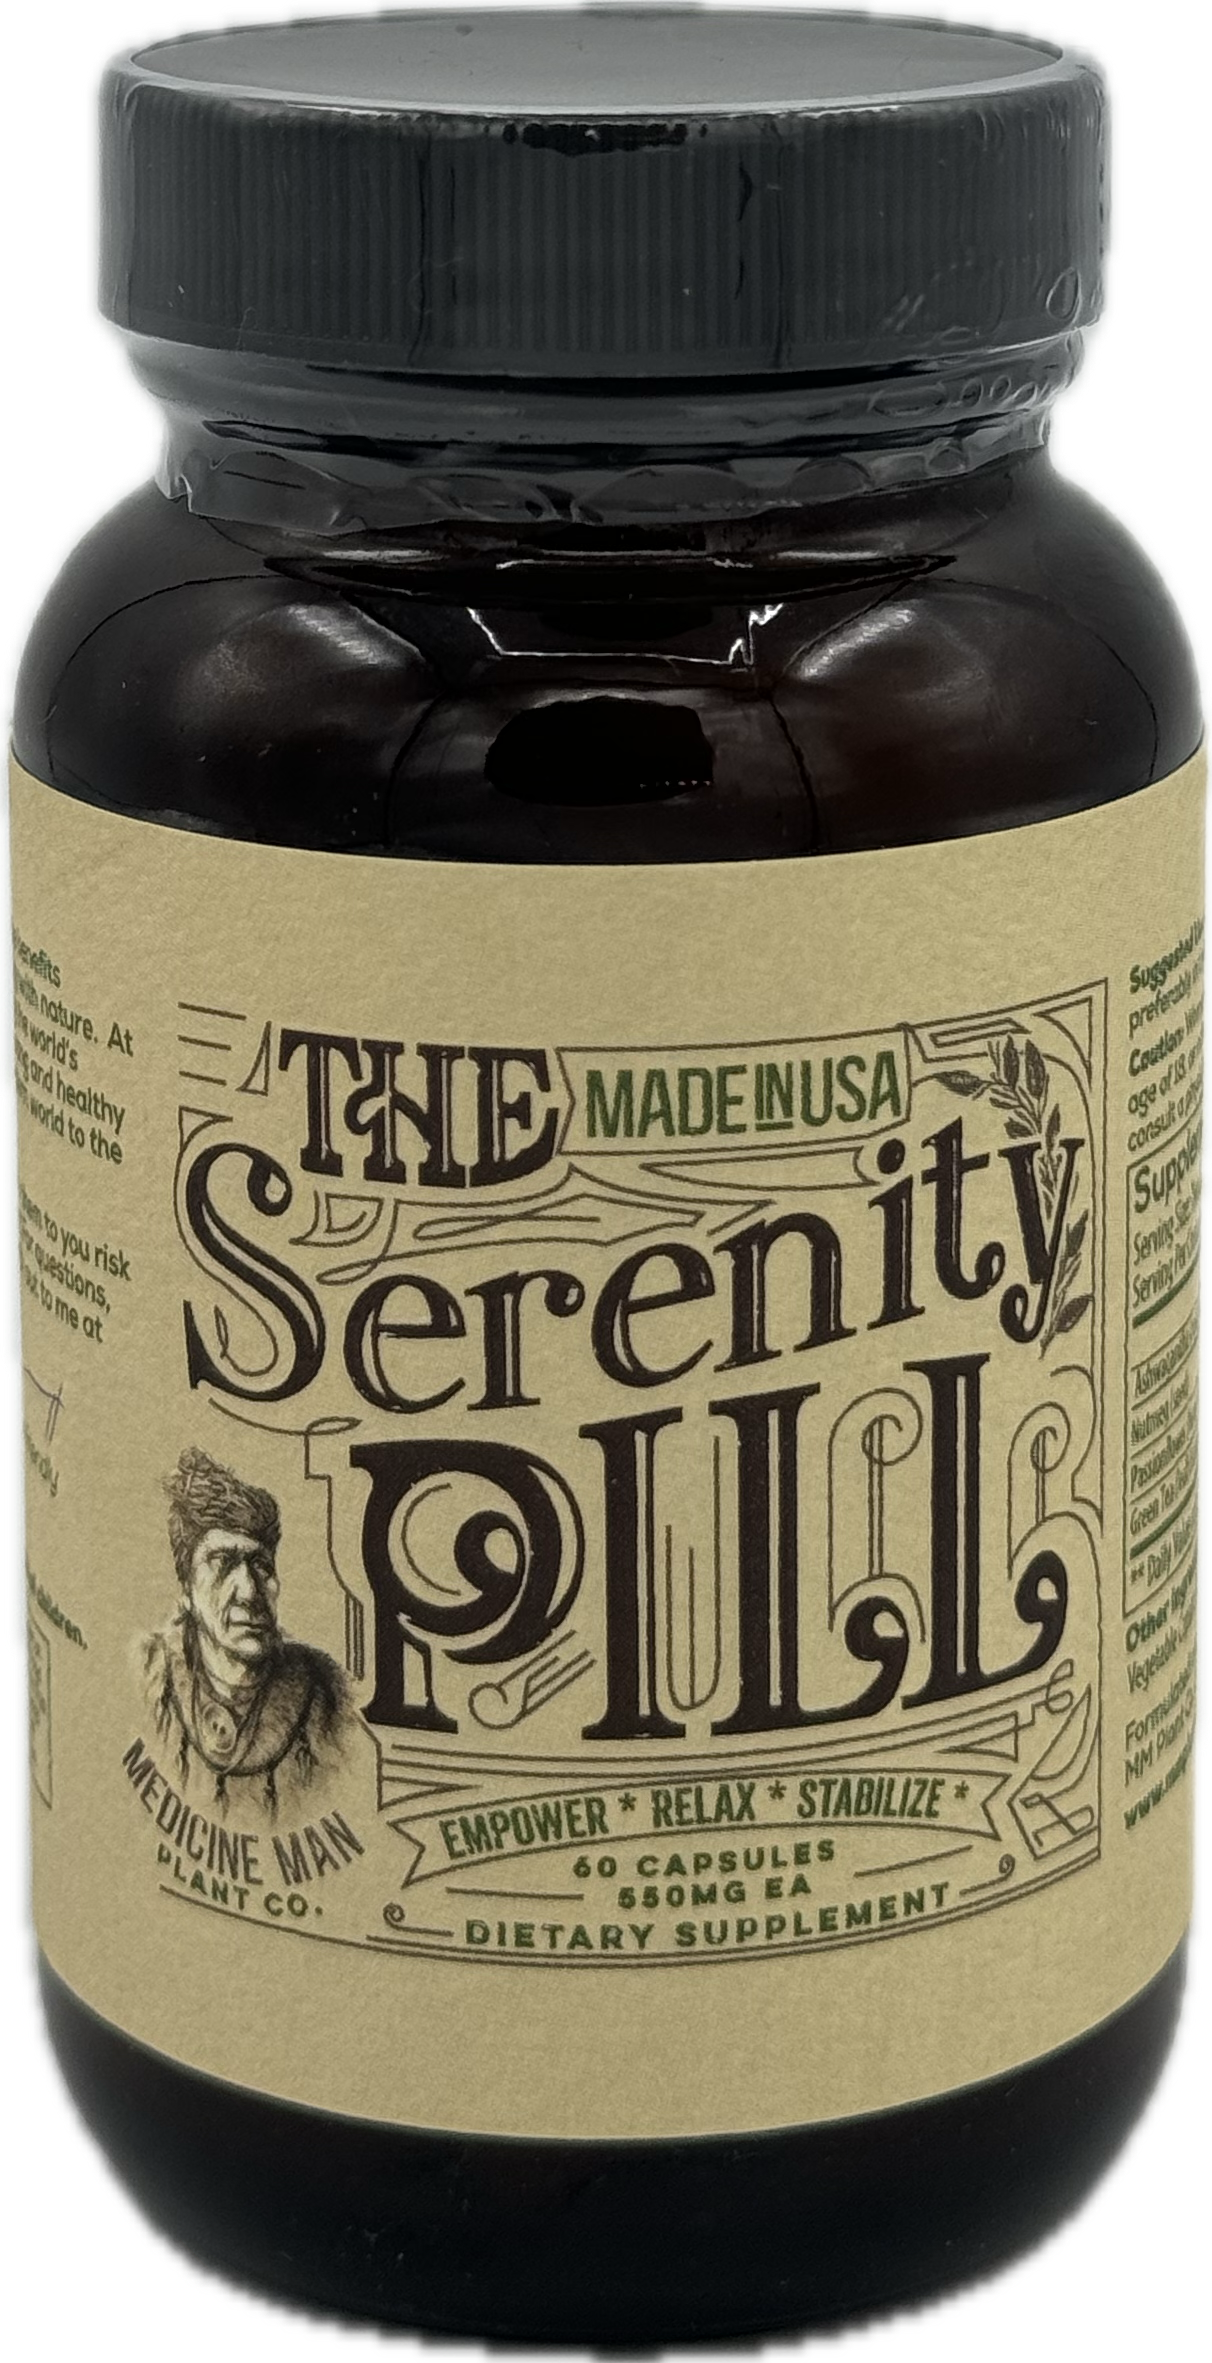 The Serenity Pill